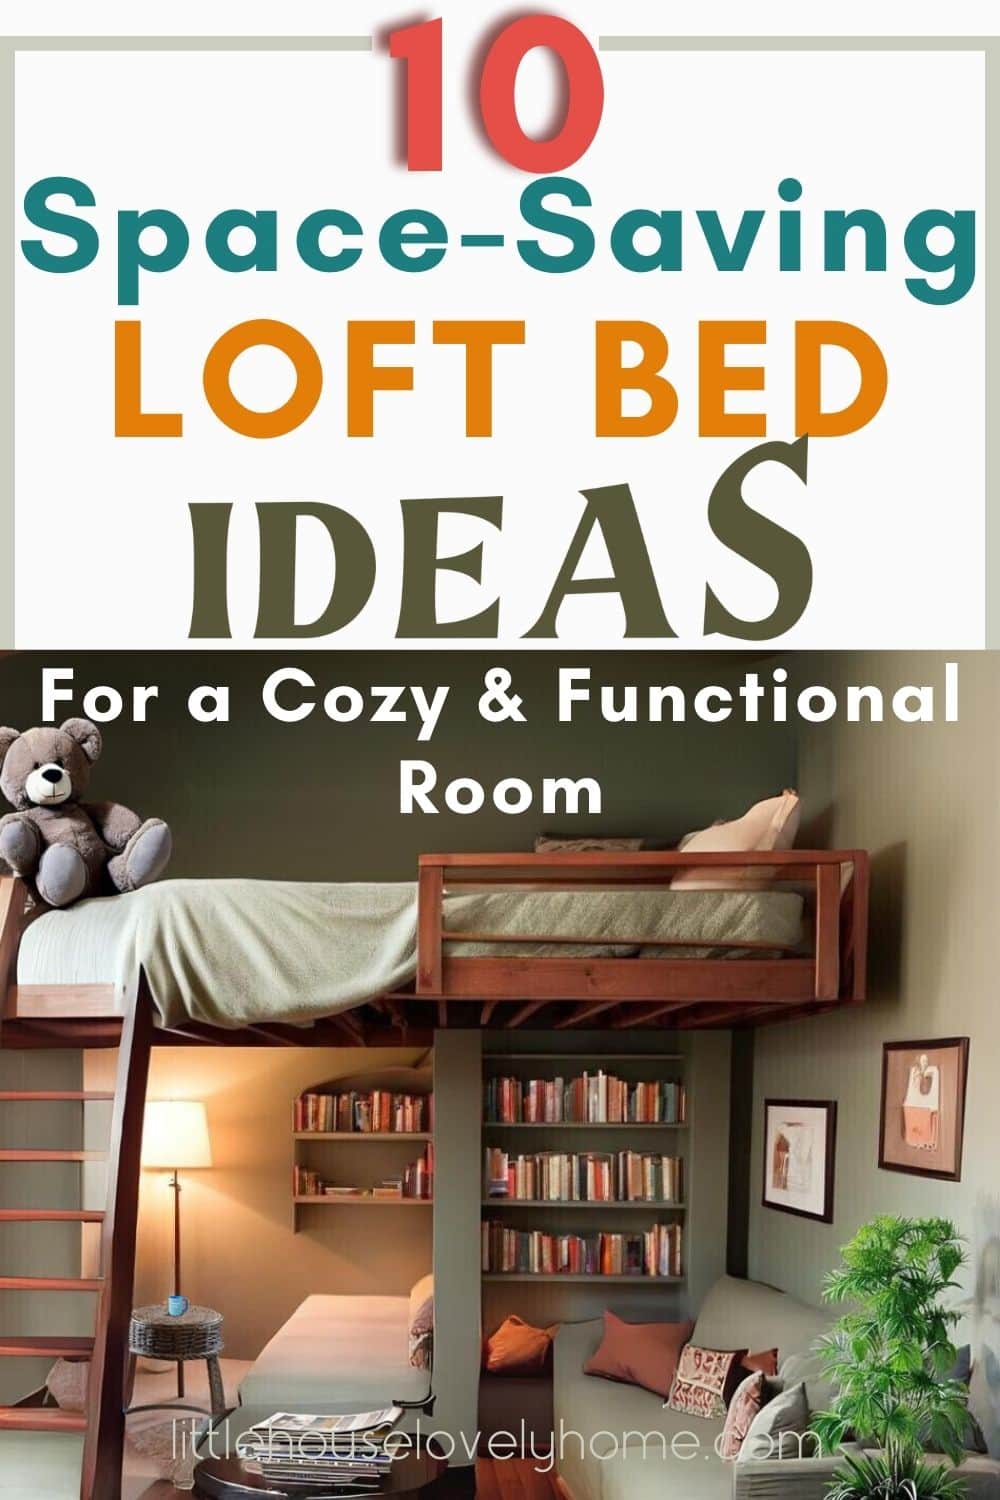 Loft Bed Ideas with reading nook